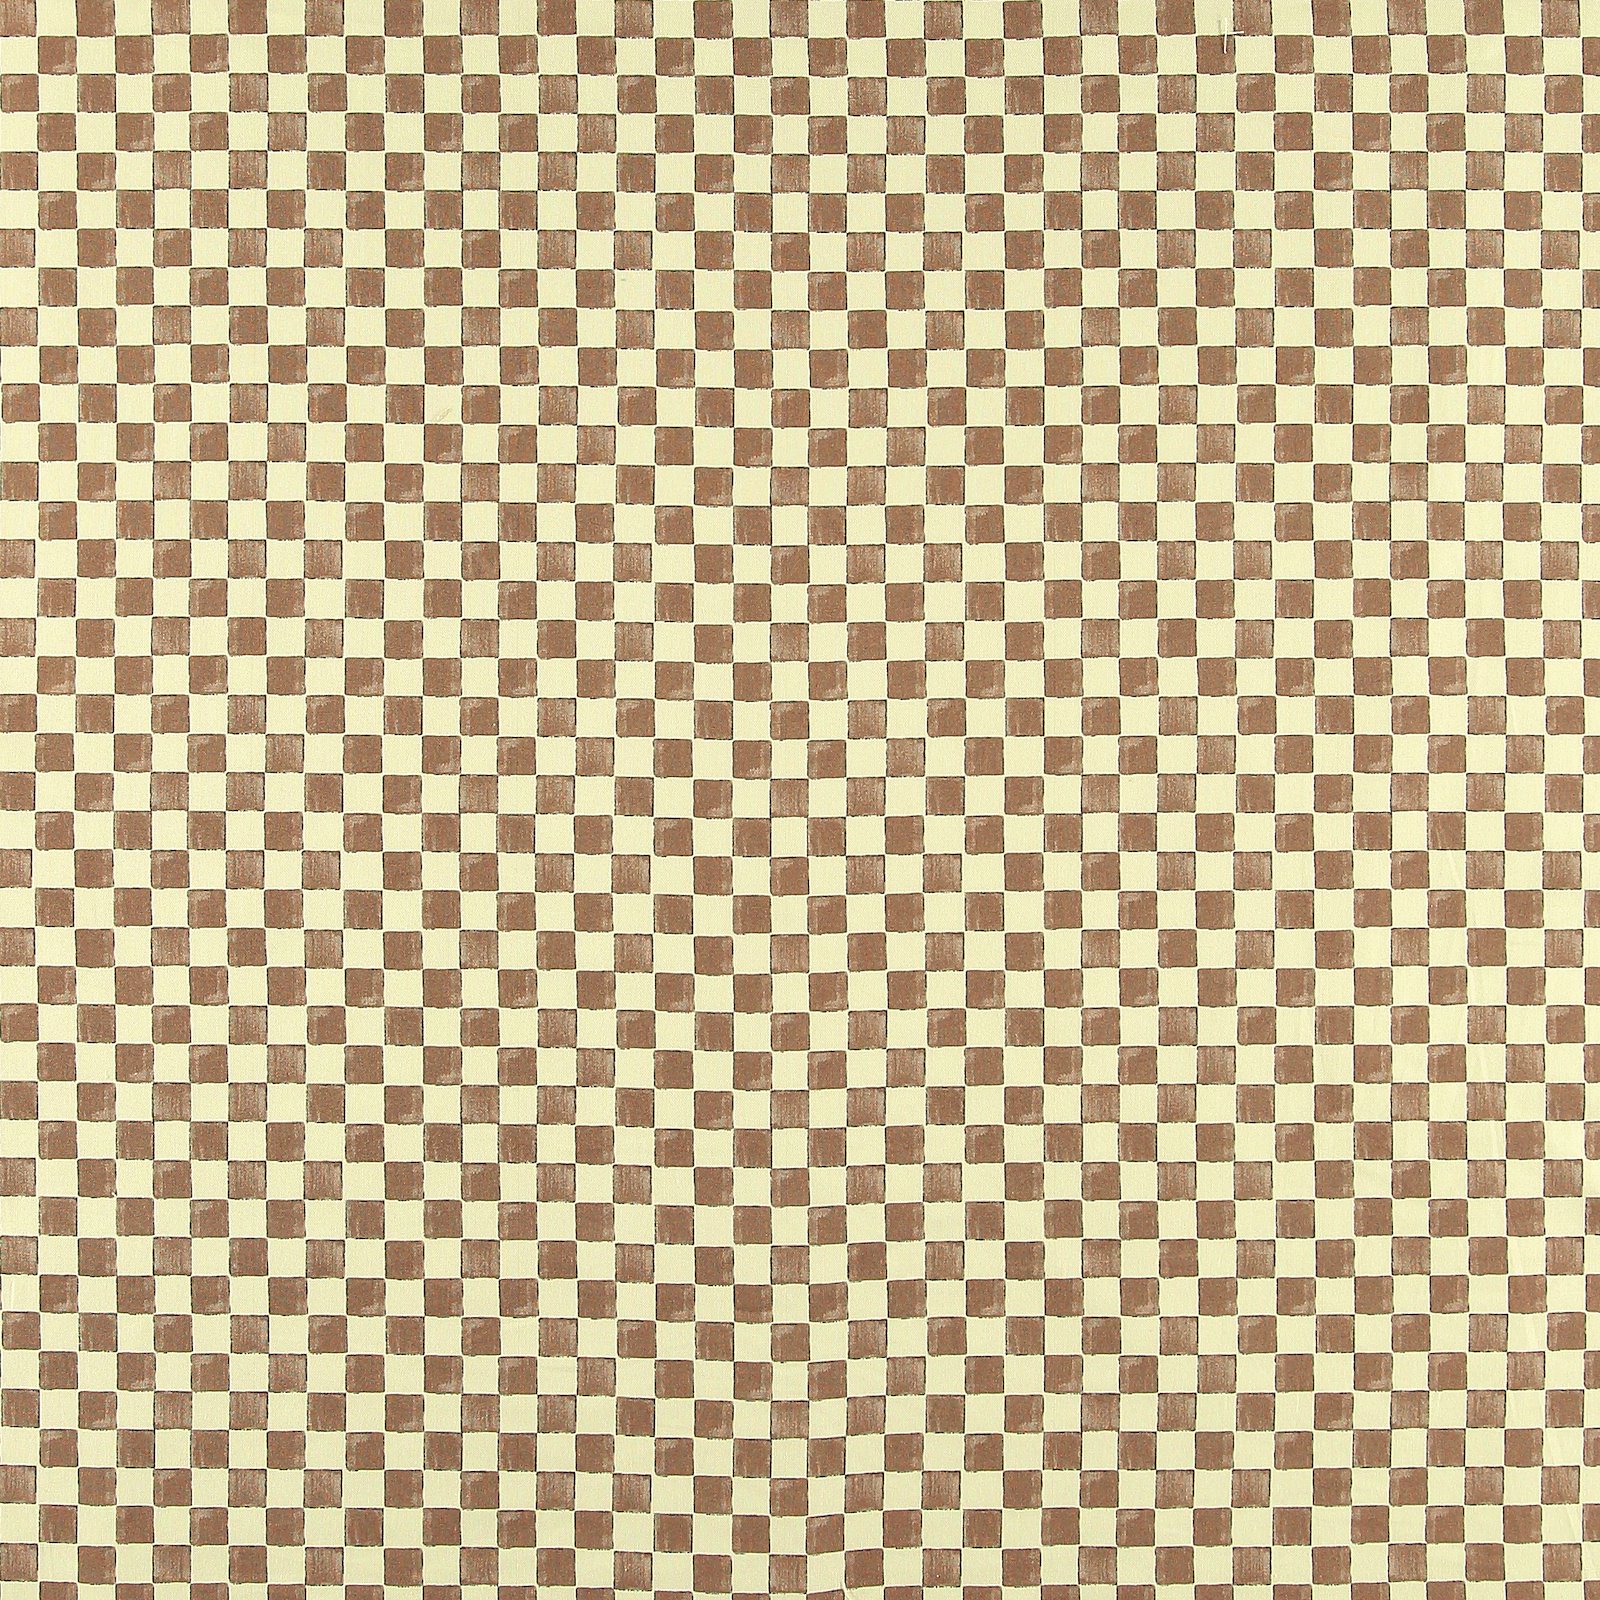 Printed cotton sage/dusty olive checks 780568_pack_sp